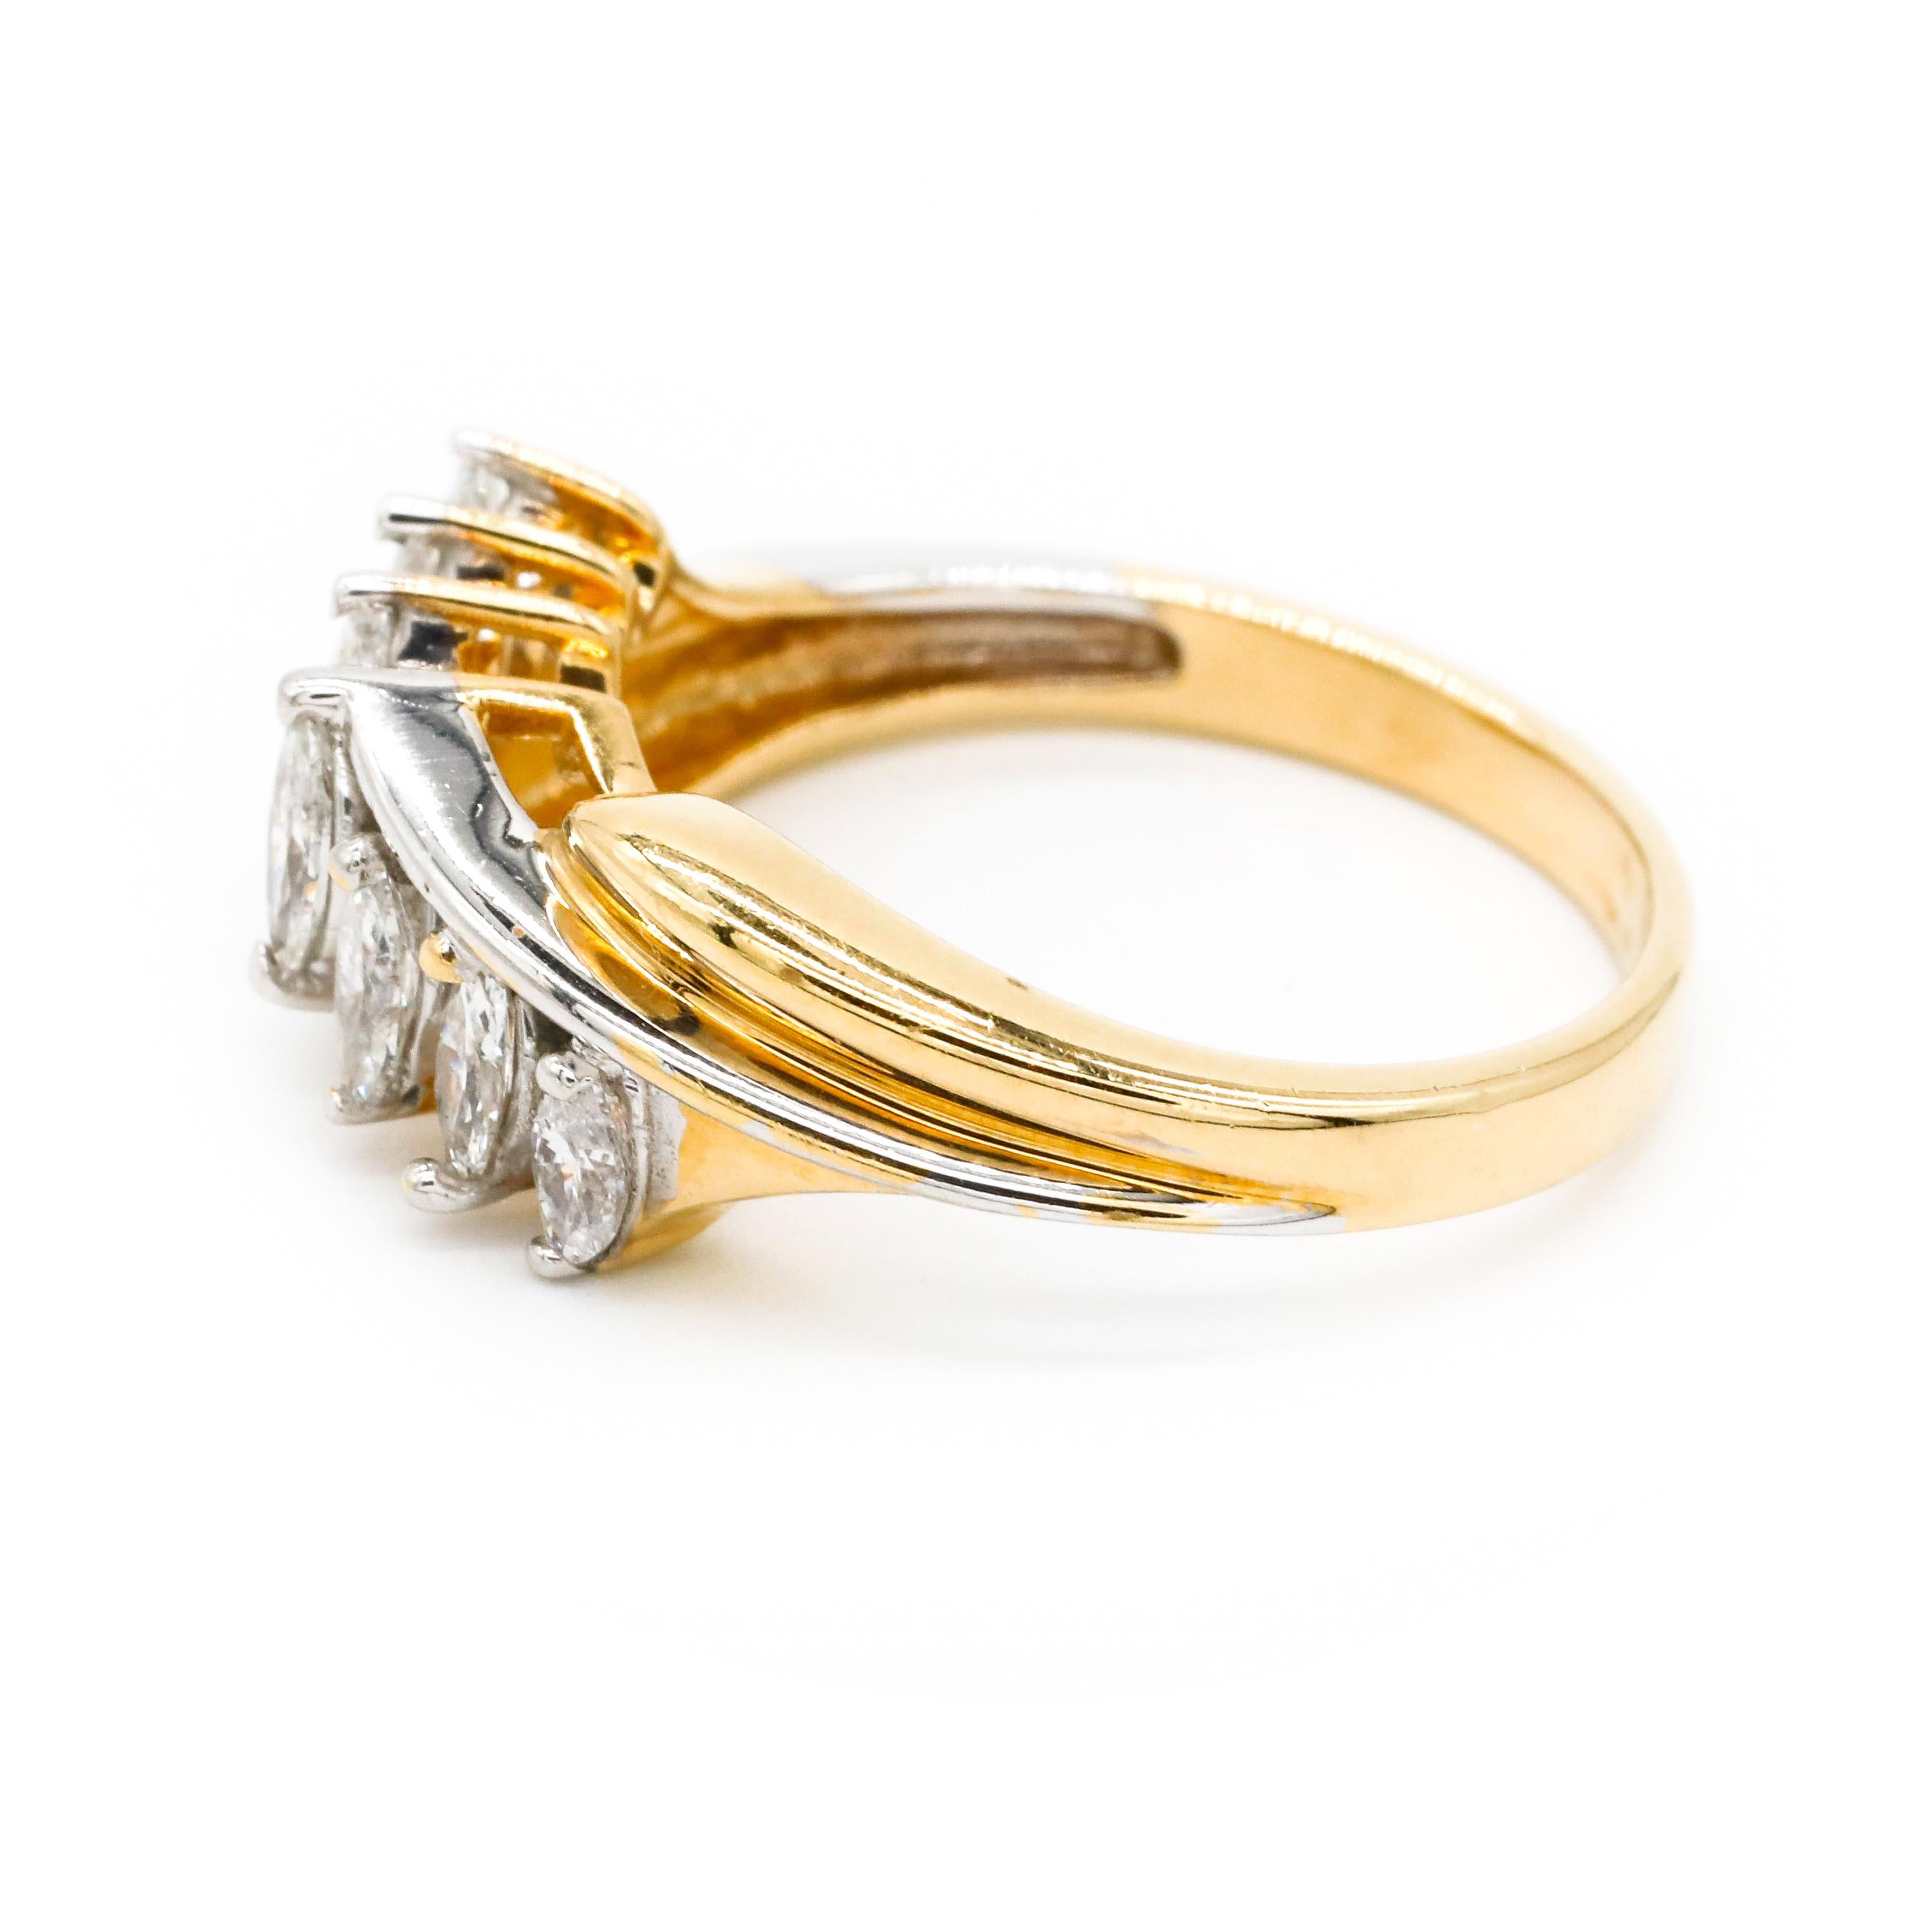 0.50 TCW Marquise Cut Diamond Fine Band Engagement Ring 18k Yellow Gold

She will be just overwhelmed with emotions when she sees this estate ring. 0.50 TCW Marquise cut Diamond ring, embraced by a frame of Marquise-shaped white diamonds, creating a